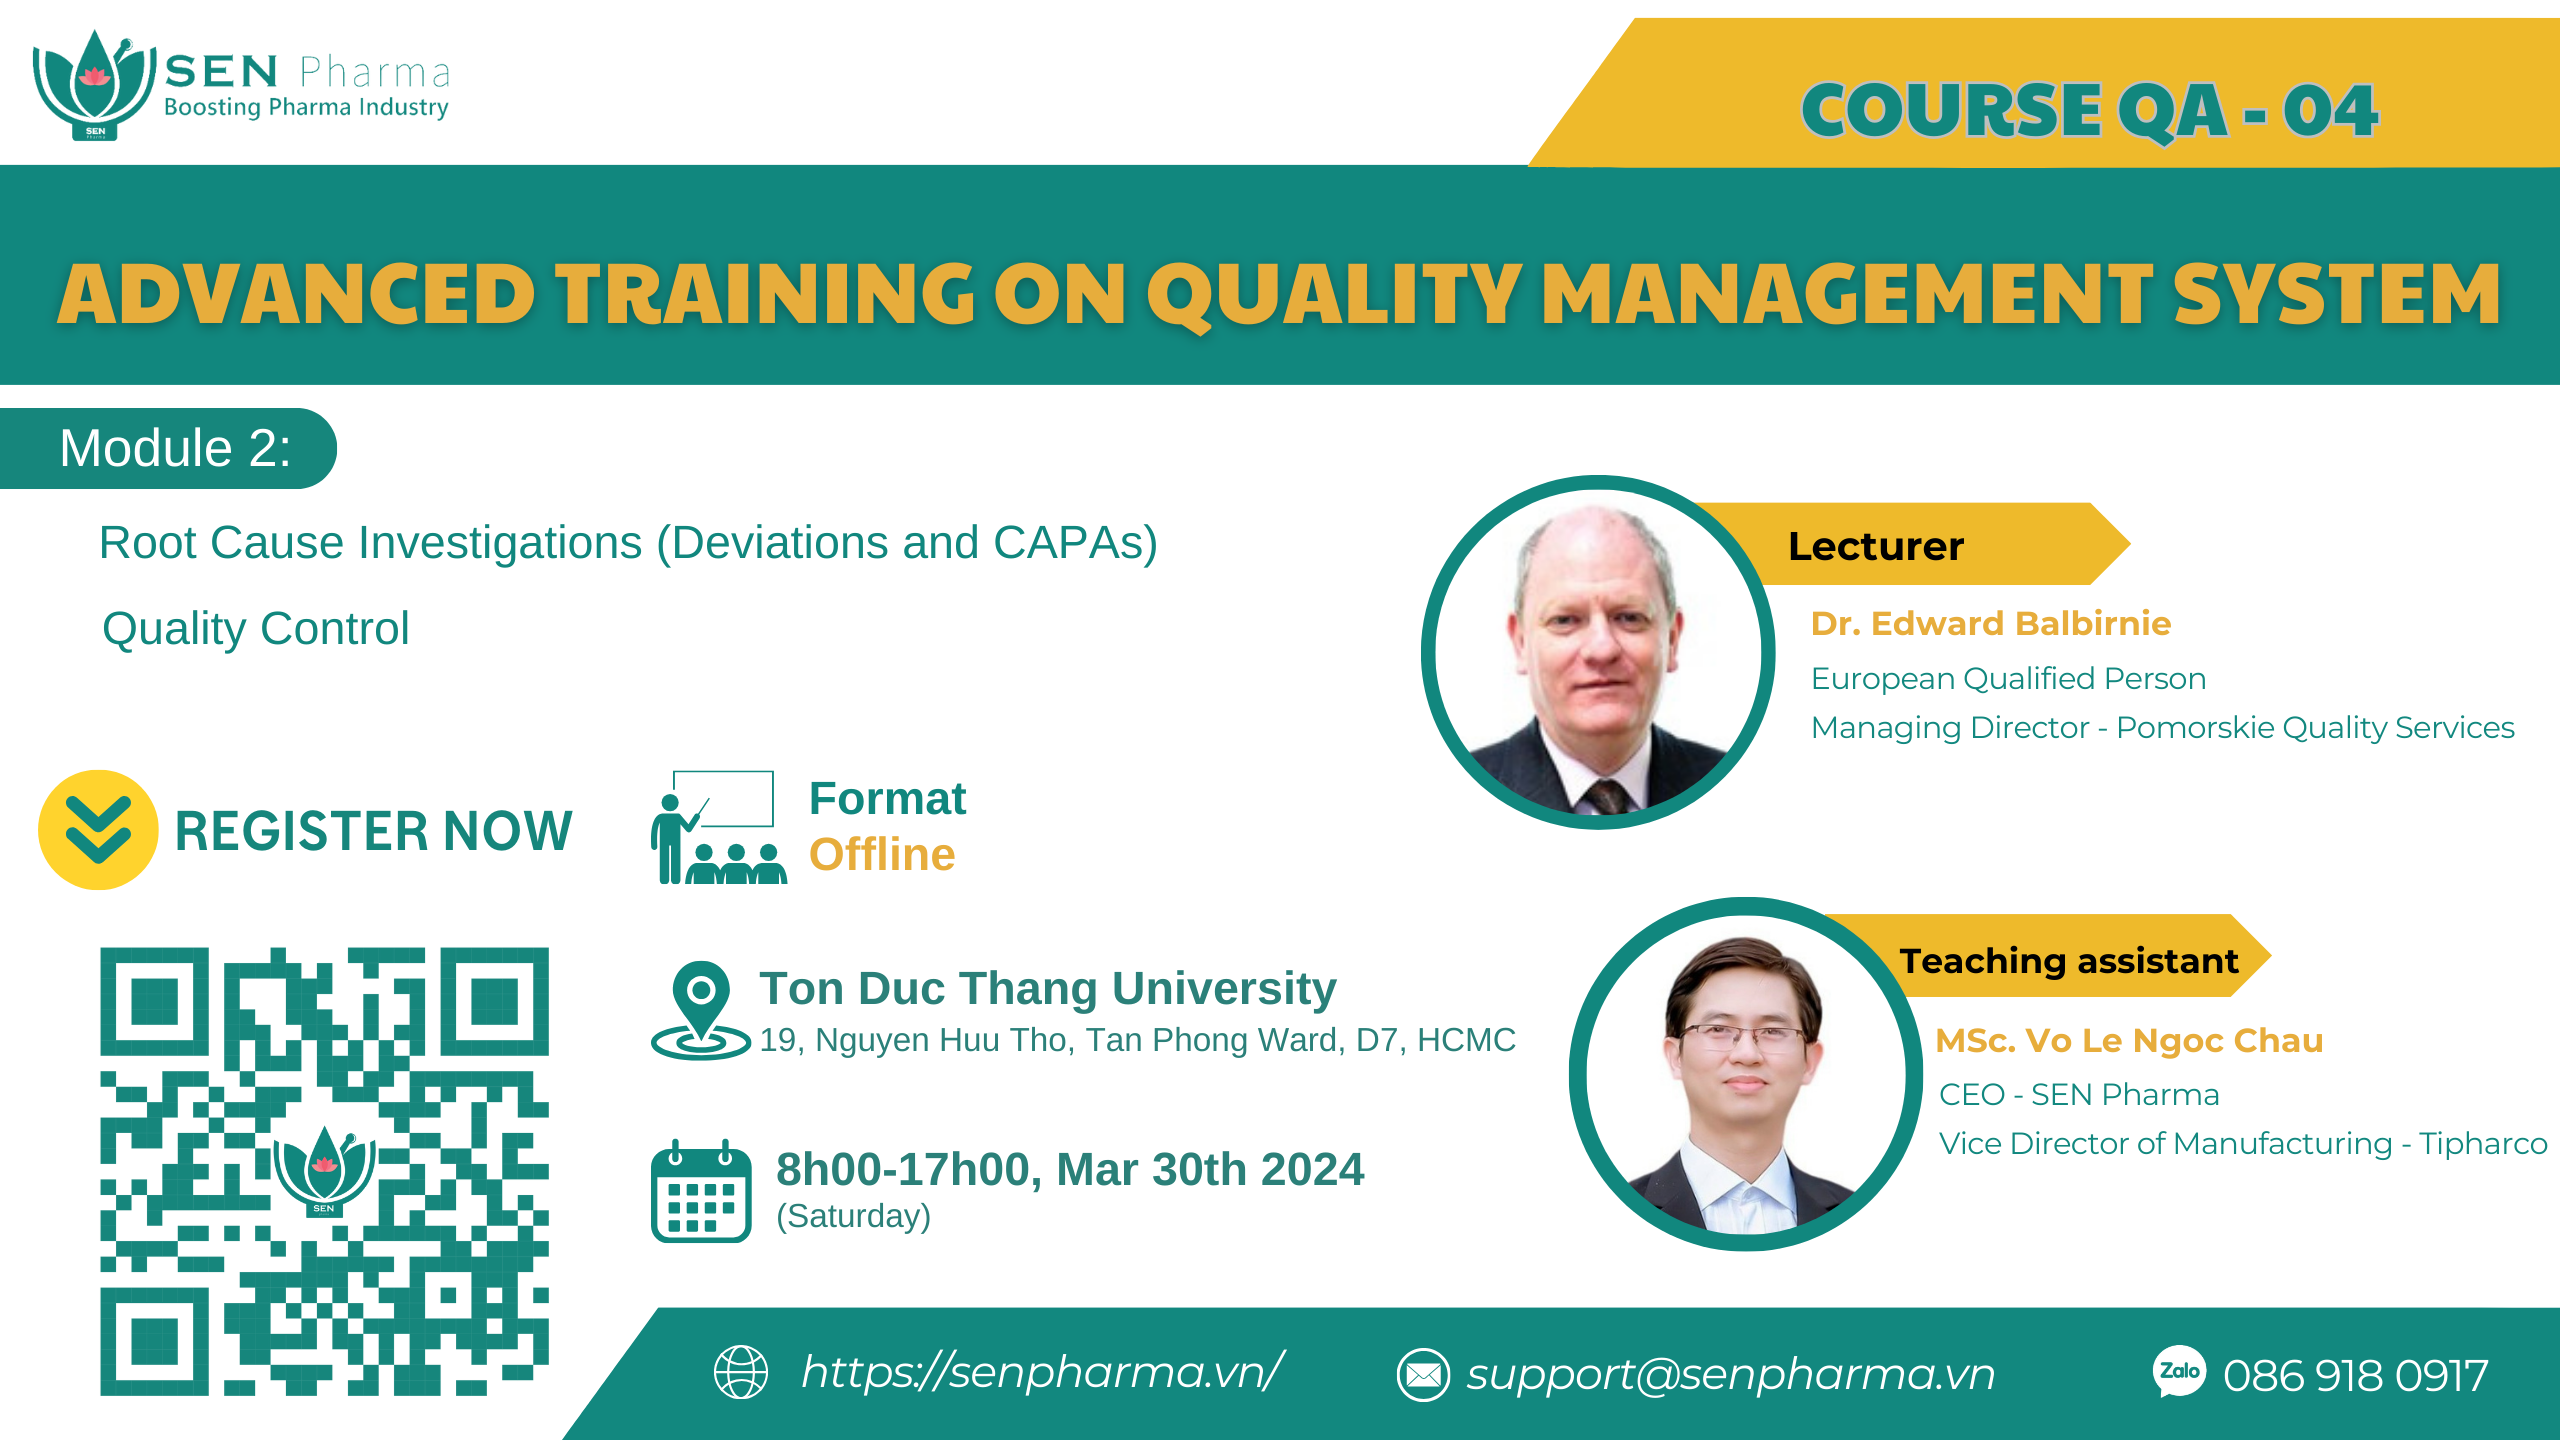 Our new training course QA-04: Advanced training on Quality Management System - Module 2